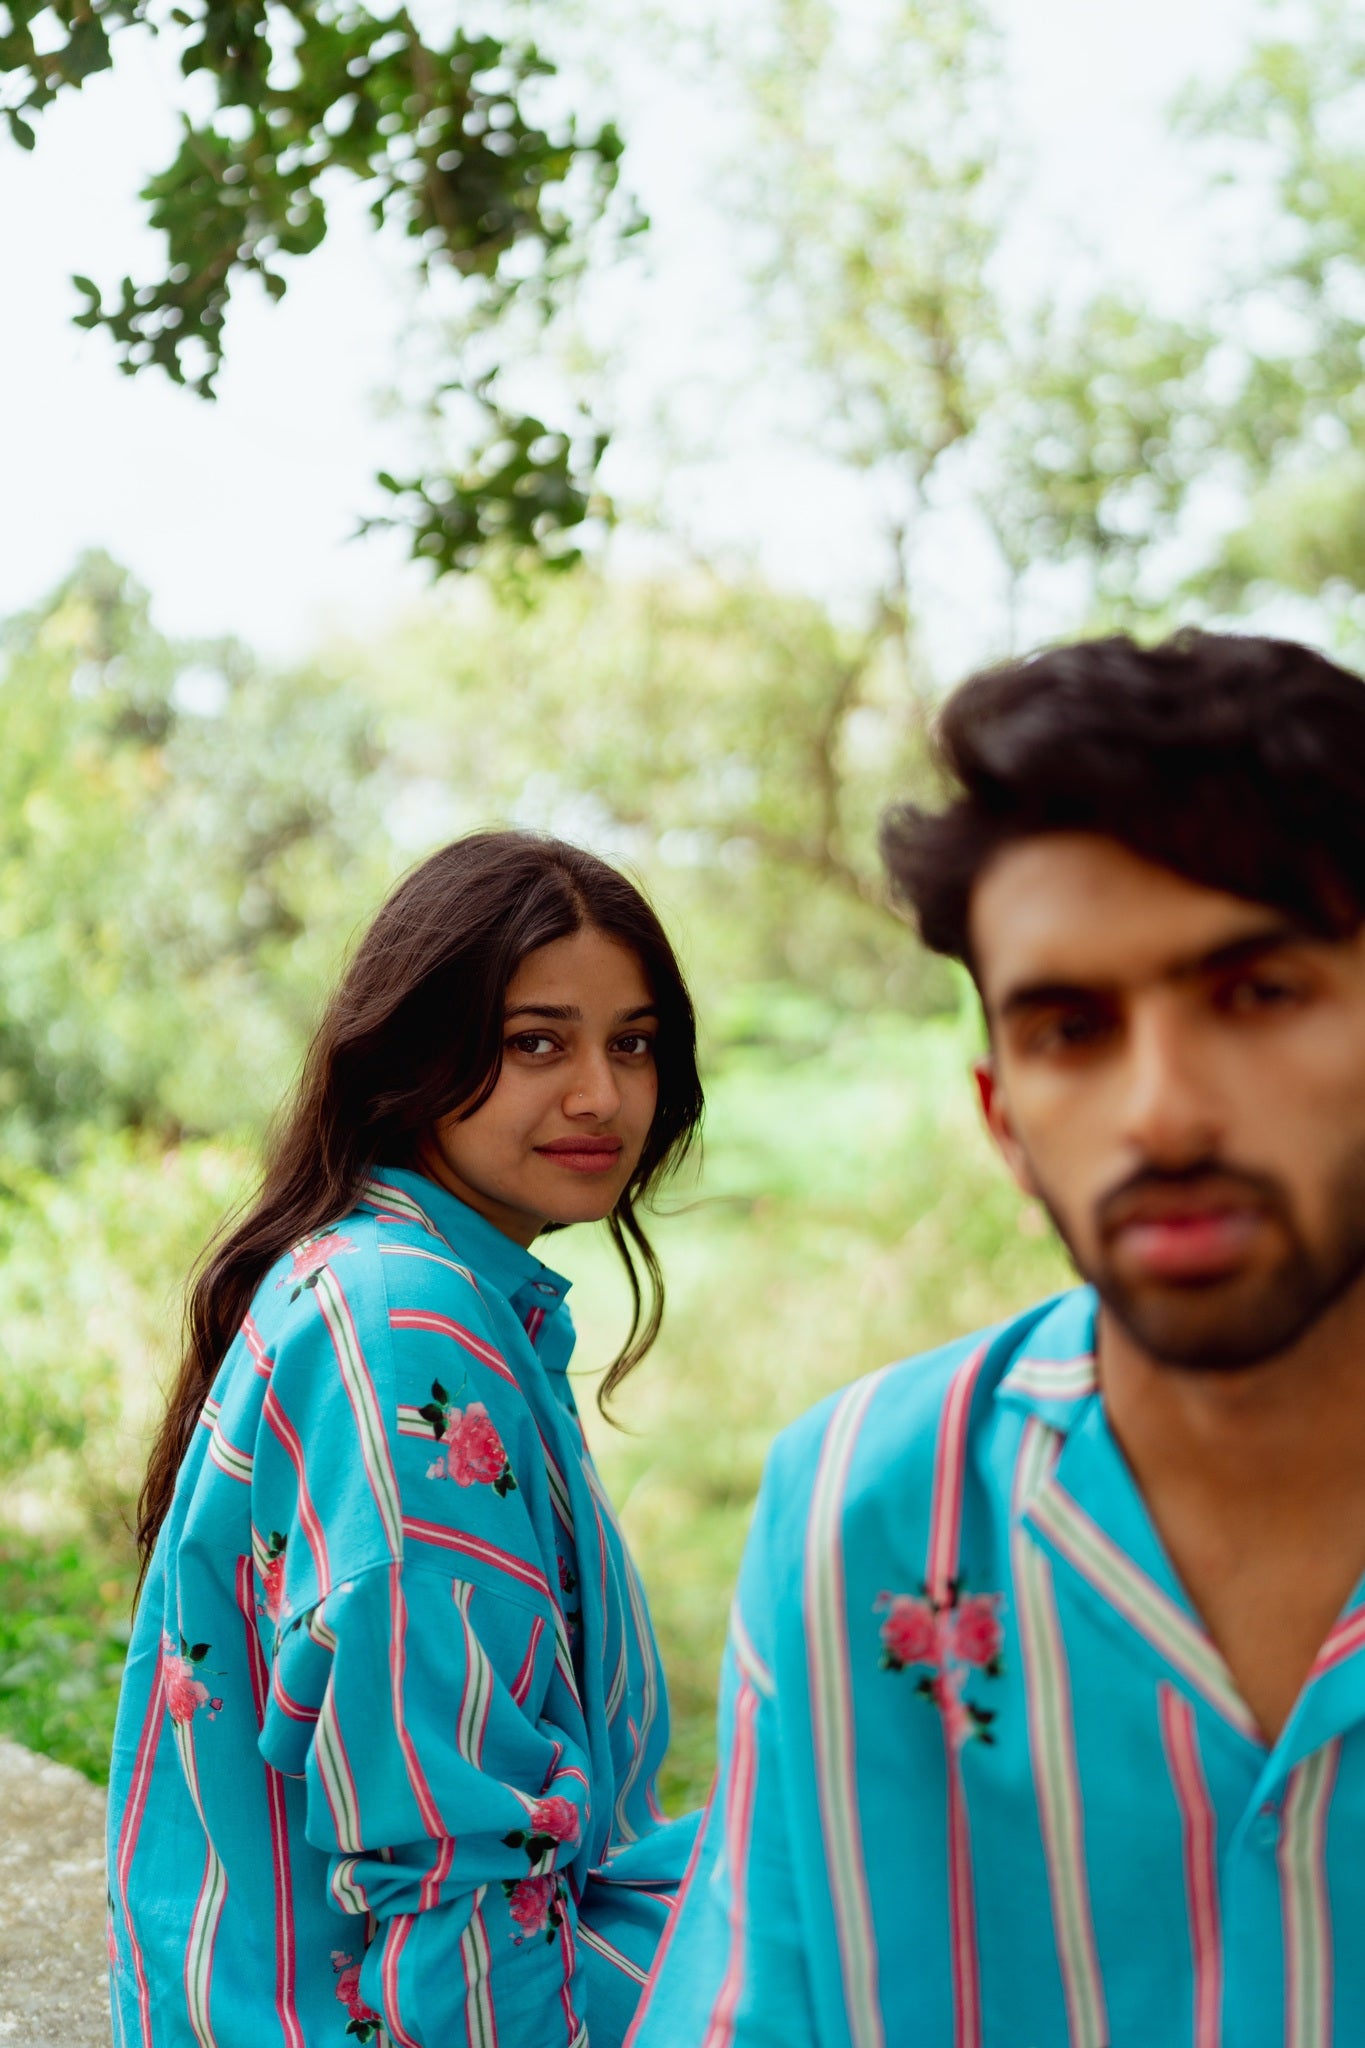 TREEJM's "Rangeela" blue shirt, made of hand-woven cotton, pairs oversized blue stripes with top-tier comfort, ideal for any event. Shop now!